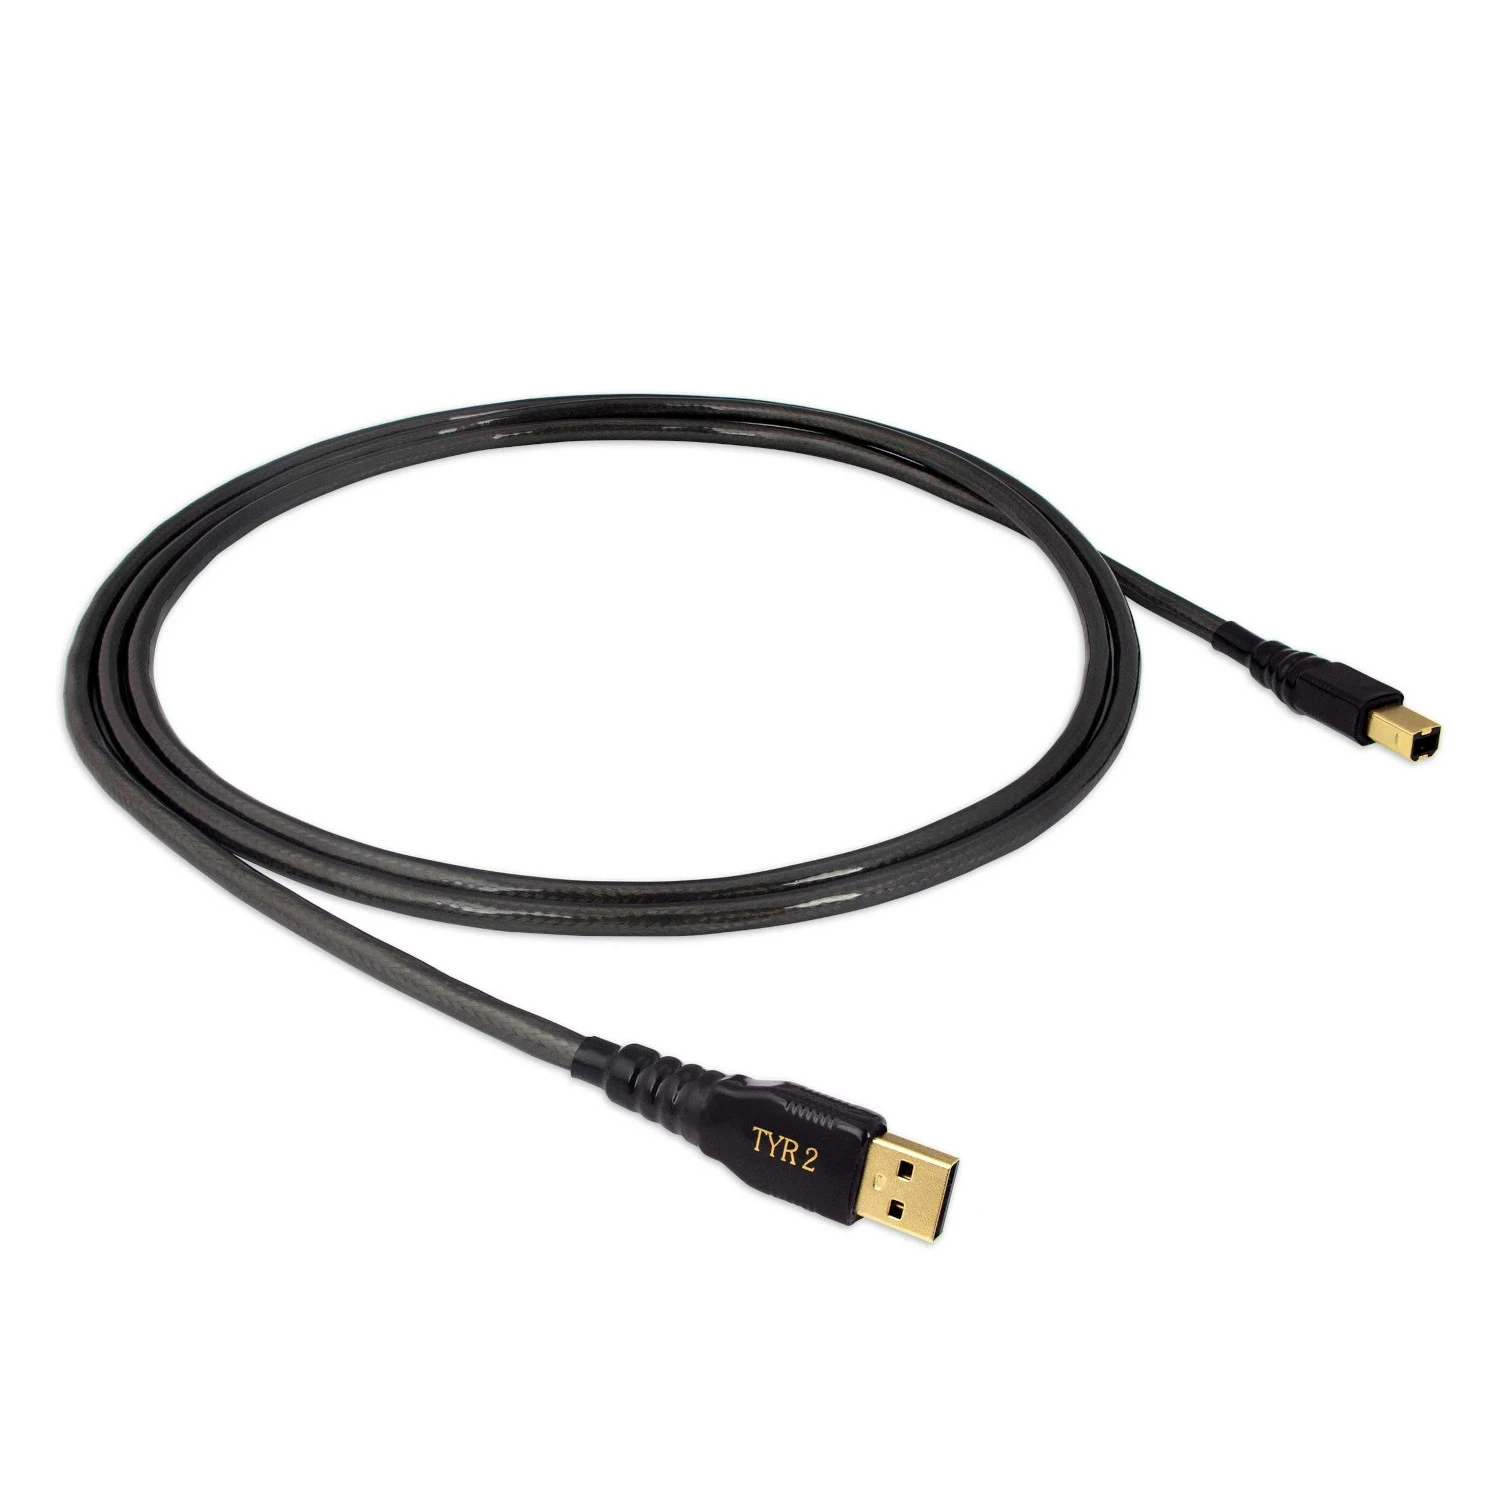 Nordost _Tyr-2_USB-2.0_Kabel_Type-A-B